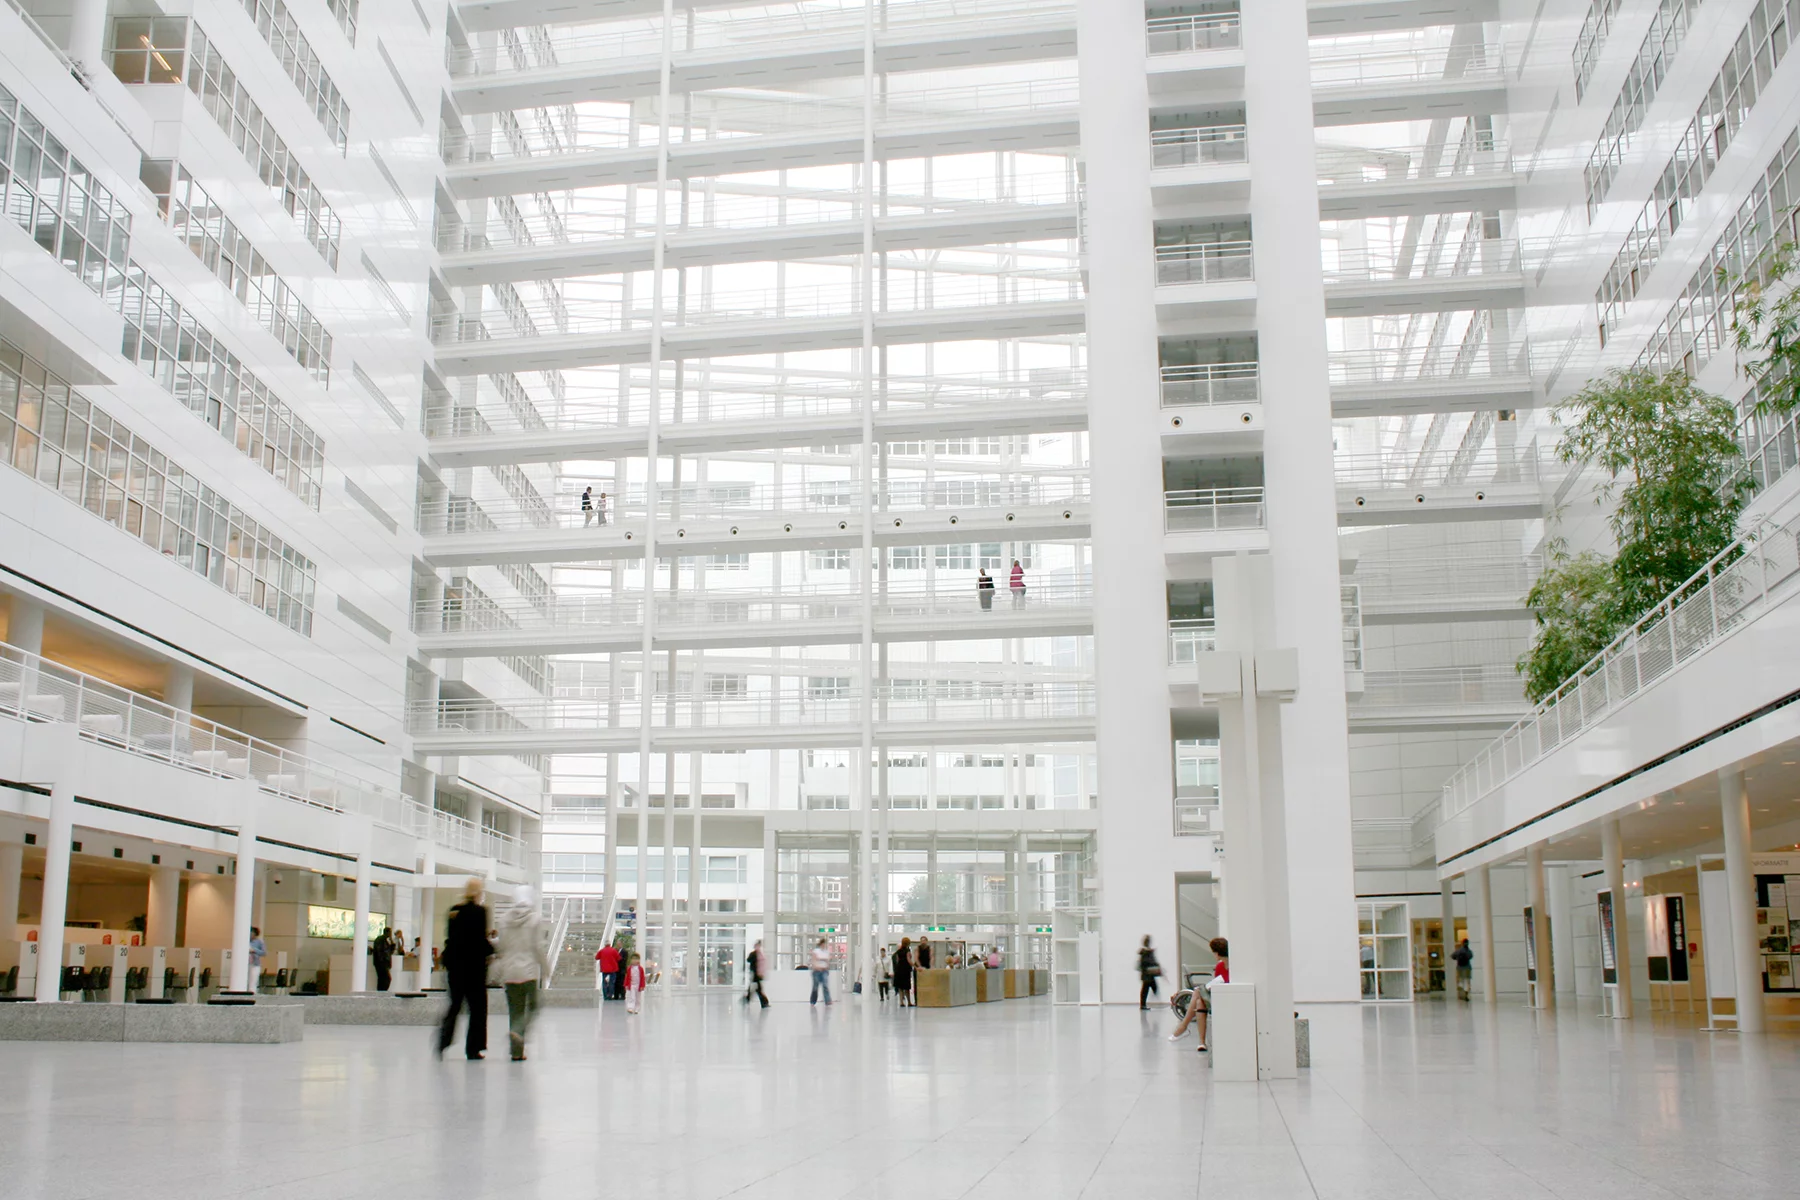 The interior of a large public atrium showing several floors, white railings